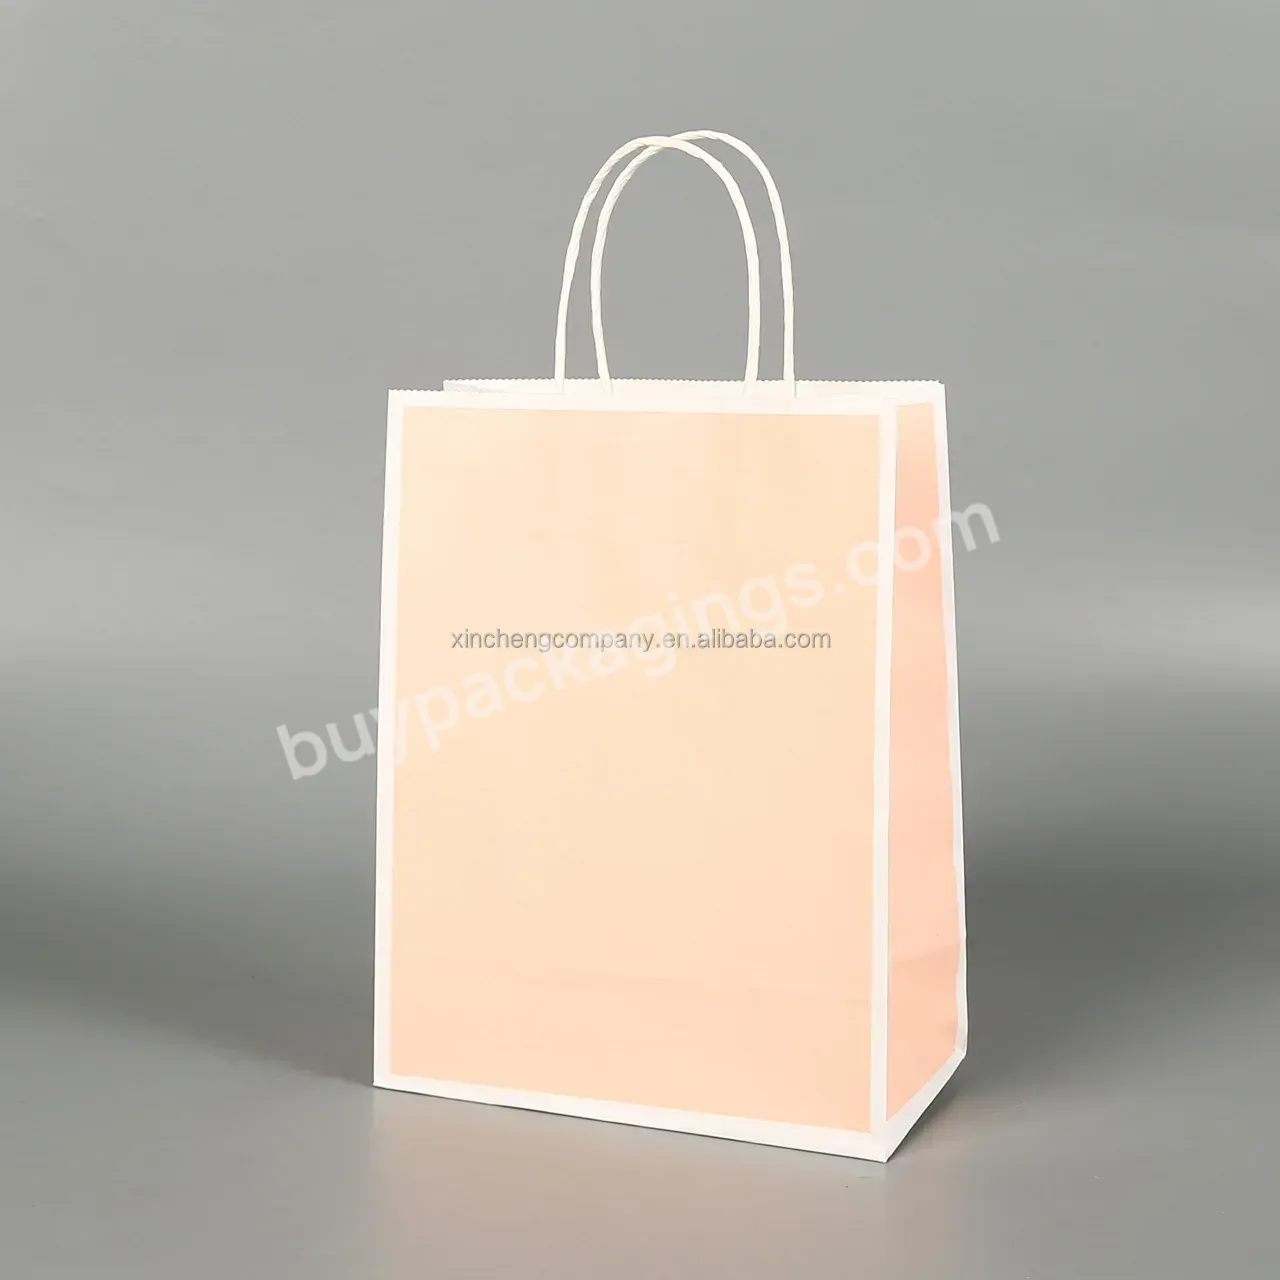 Luxury Paper Carrier Kraft Bags With Your Own Logo High Quality Customized Craft Paper Pdf Custom Desgin Packaging Bag Accept